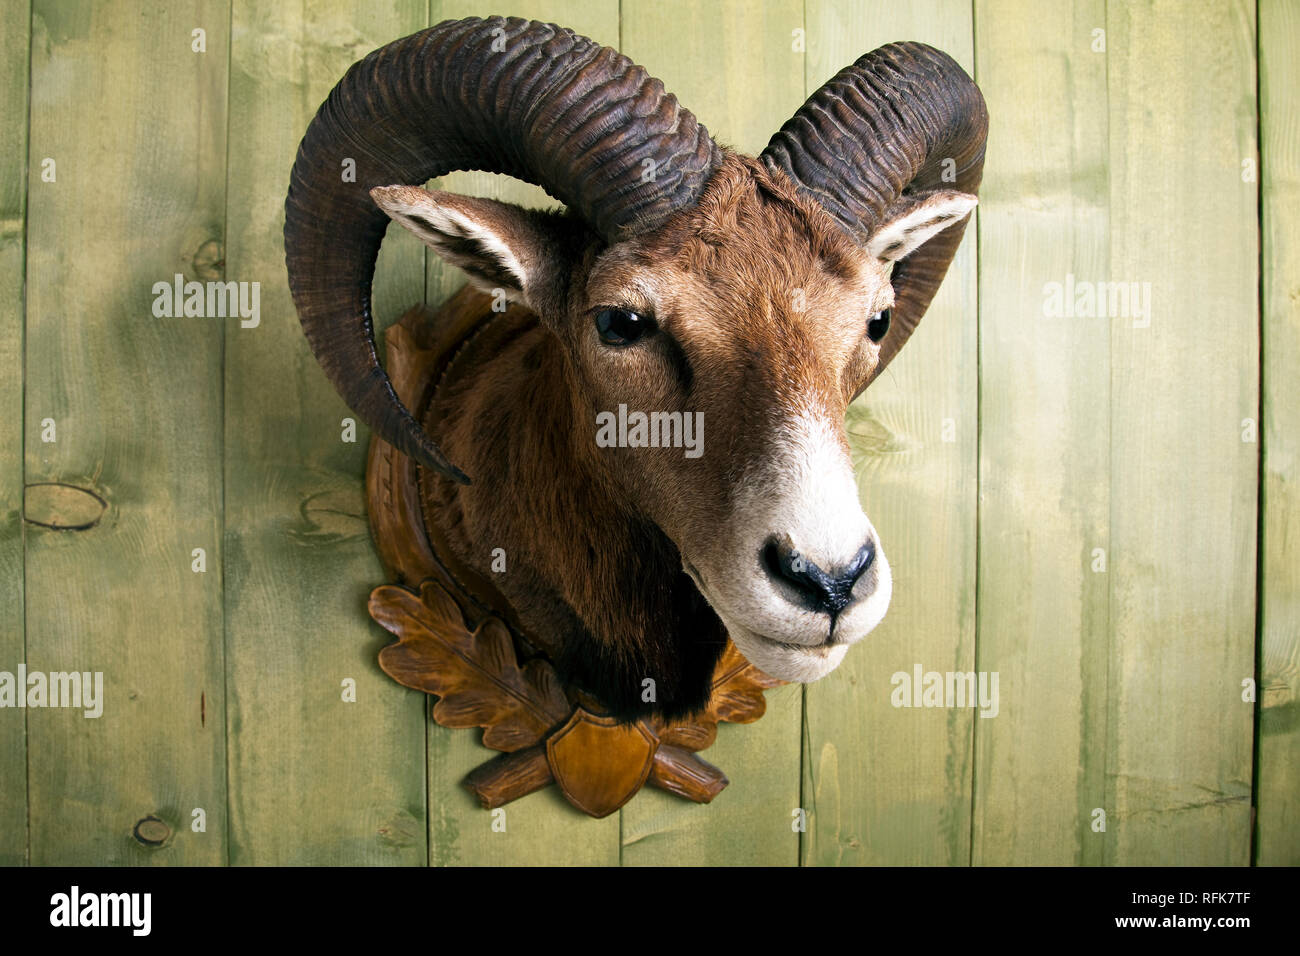 Prepared mouflon hanging on a wooden wall Stock Photo